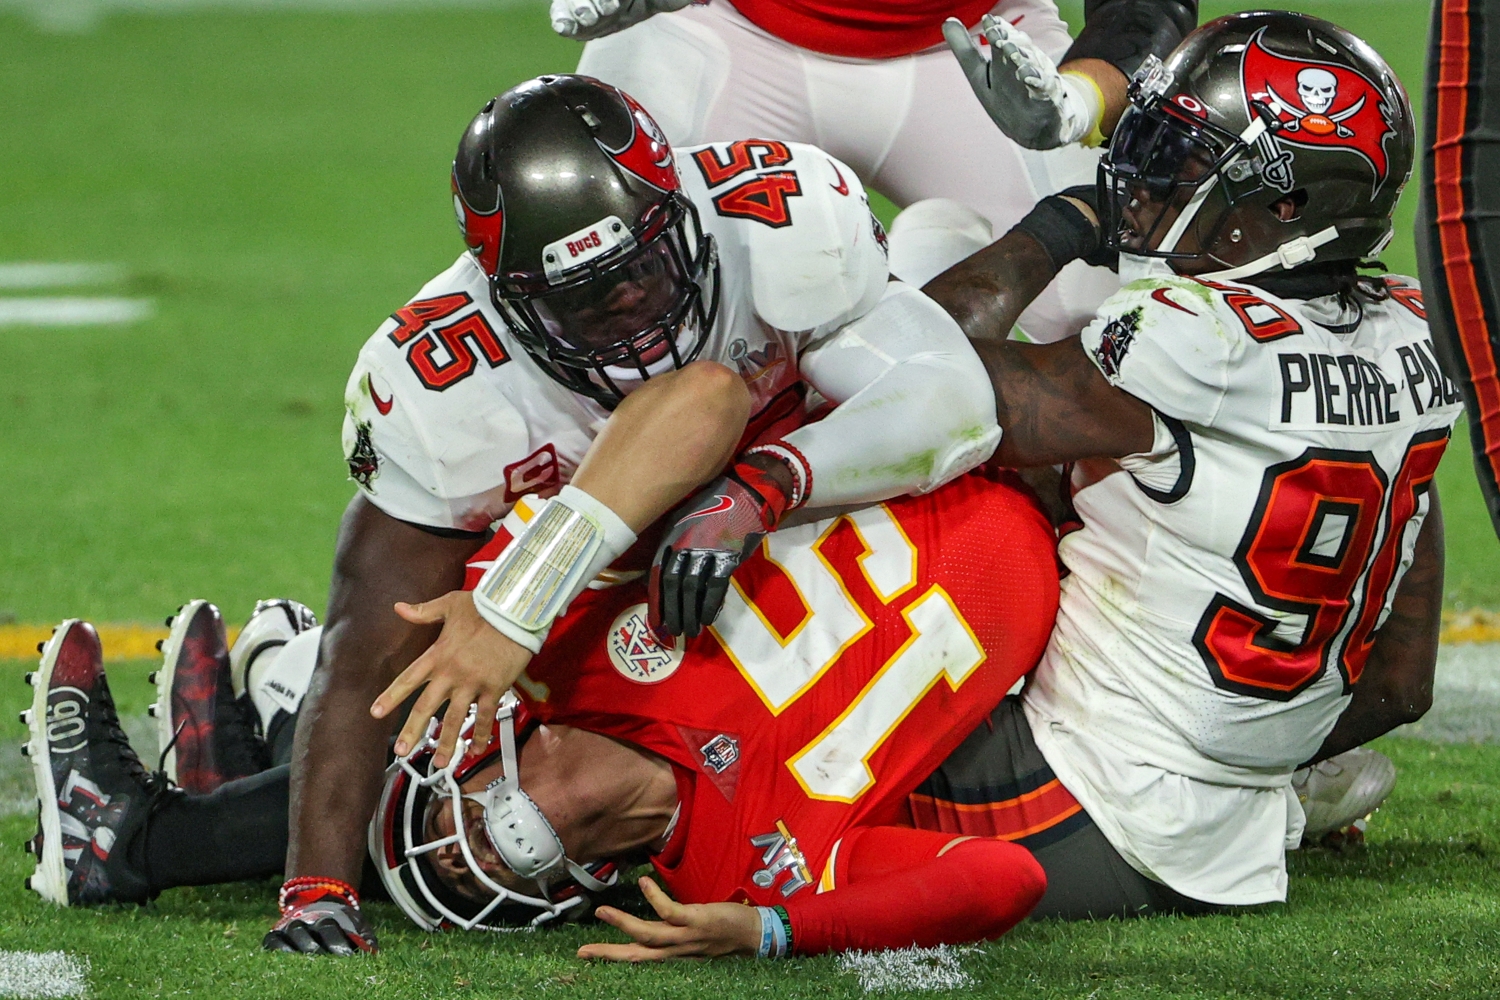 Chiefs quarterback Patrick Mahomes gets sacked by Buccaneers defenders Jason Pierre-Paul and Devin White in Super Bowl 55.